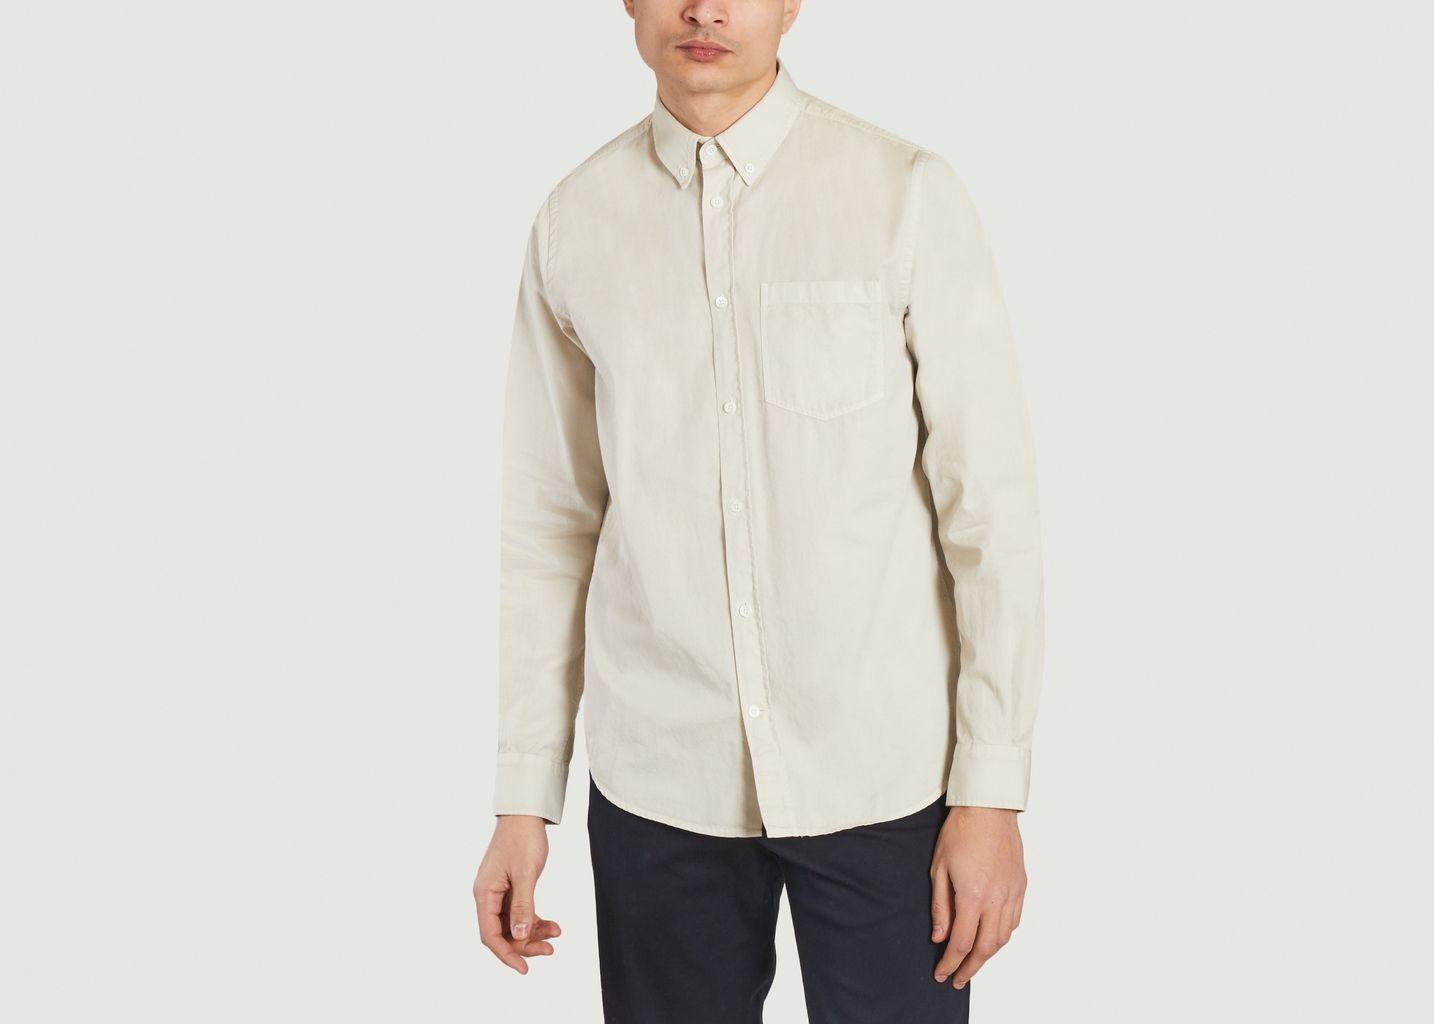 Anton Light Twill shirt - Norse Projects